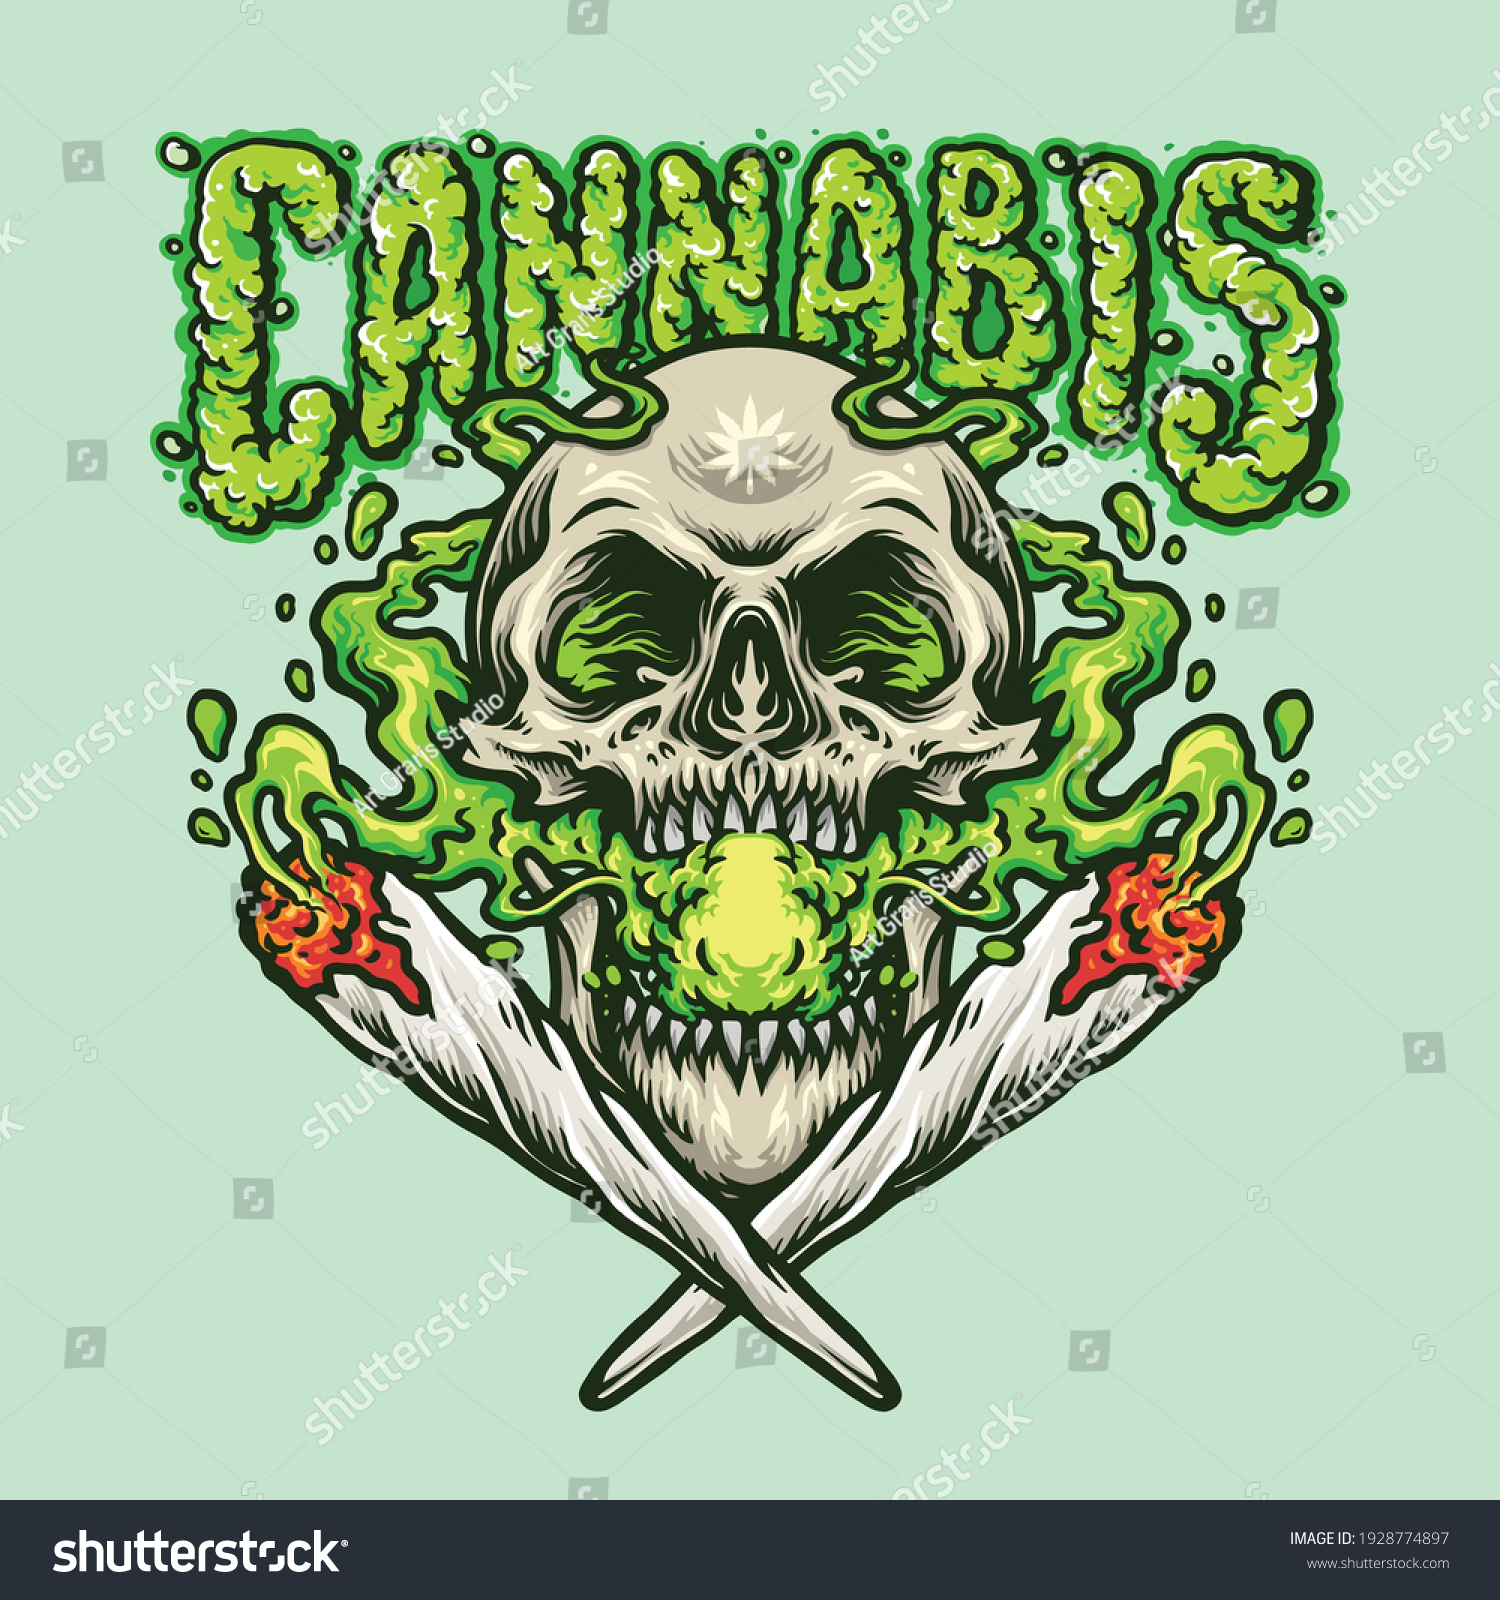 SVG of Smoking Skull Cannabis Joint illustrations for your work Logo, mascot merchandise t-shirt, stickers and Label designs, poster, greeting cards advertising business company or brands.
 svg